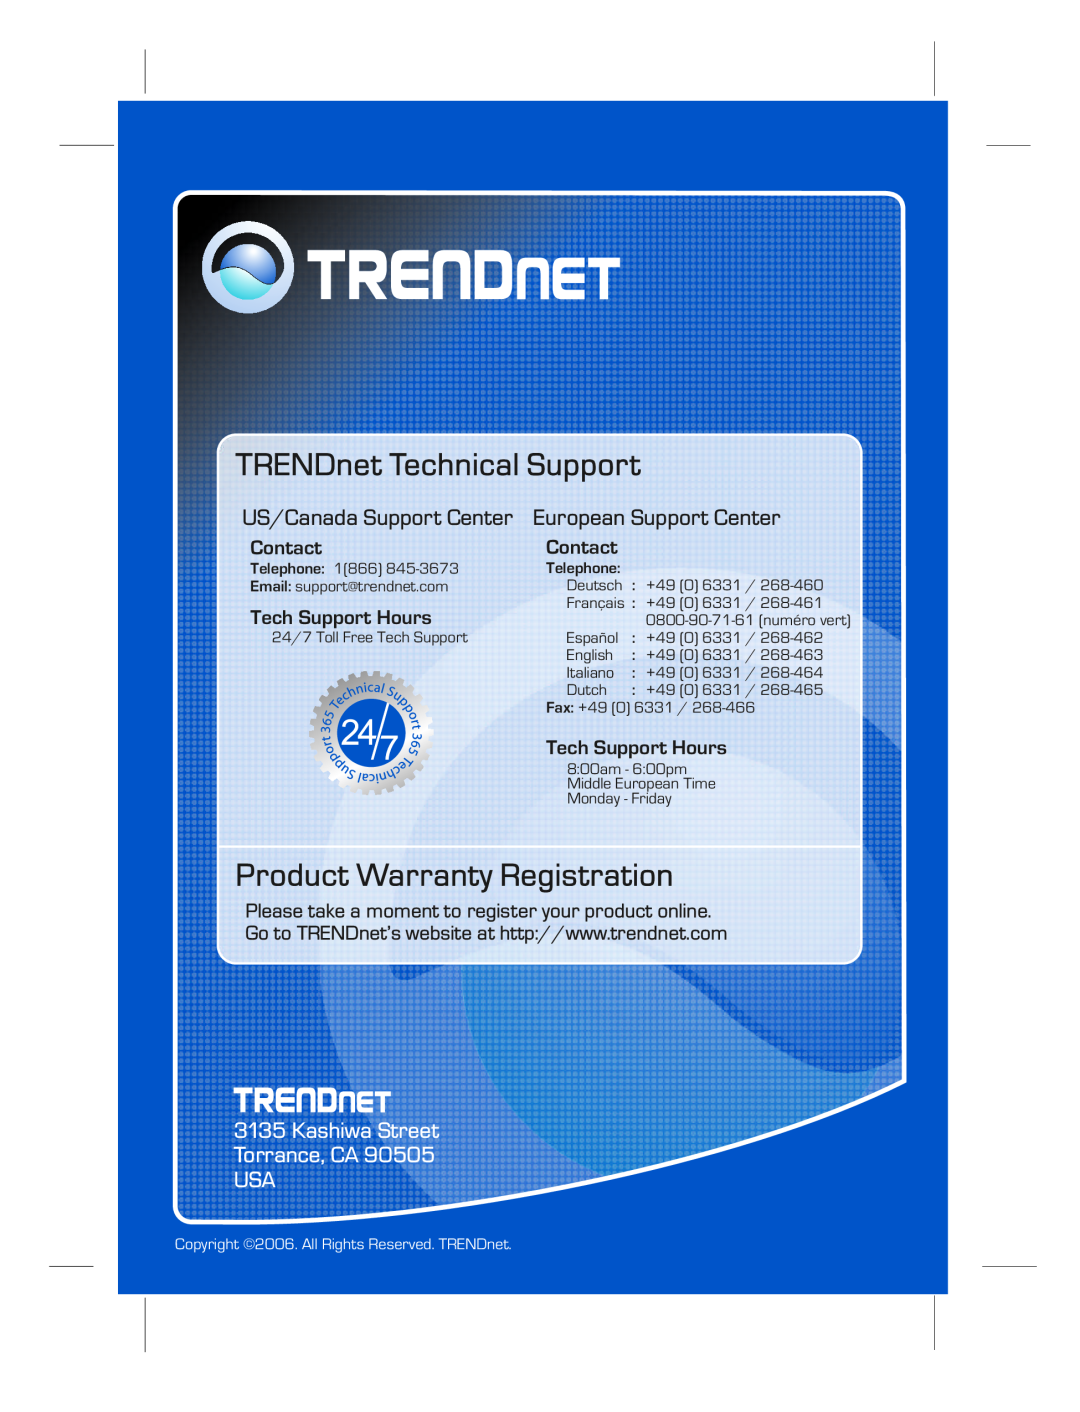 TRENDnet TFW-H3PI TRENDnet Technical Support, Product Warranty Registration, Kashiwa Street Torrance, CA USA, Contact 